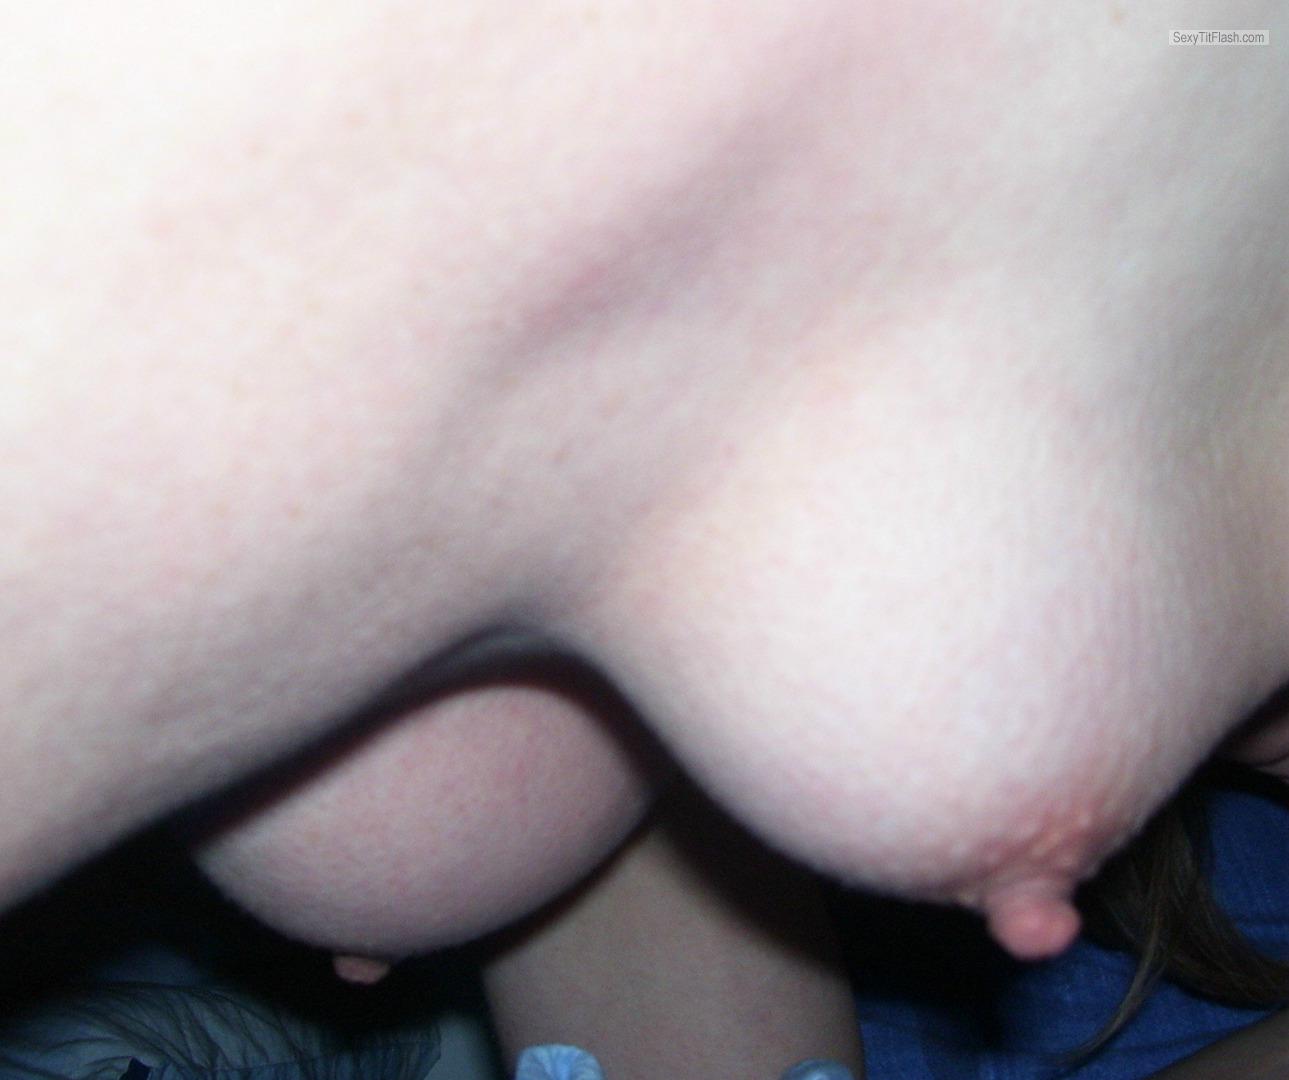 Tit Flash: My Very Small Tits - Topless Sanny65 from Germany